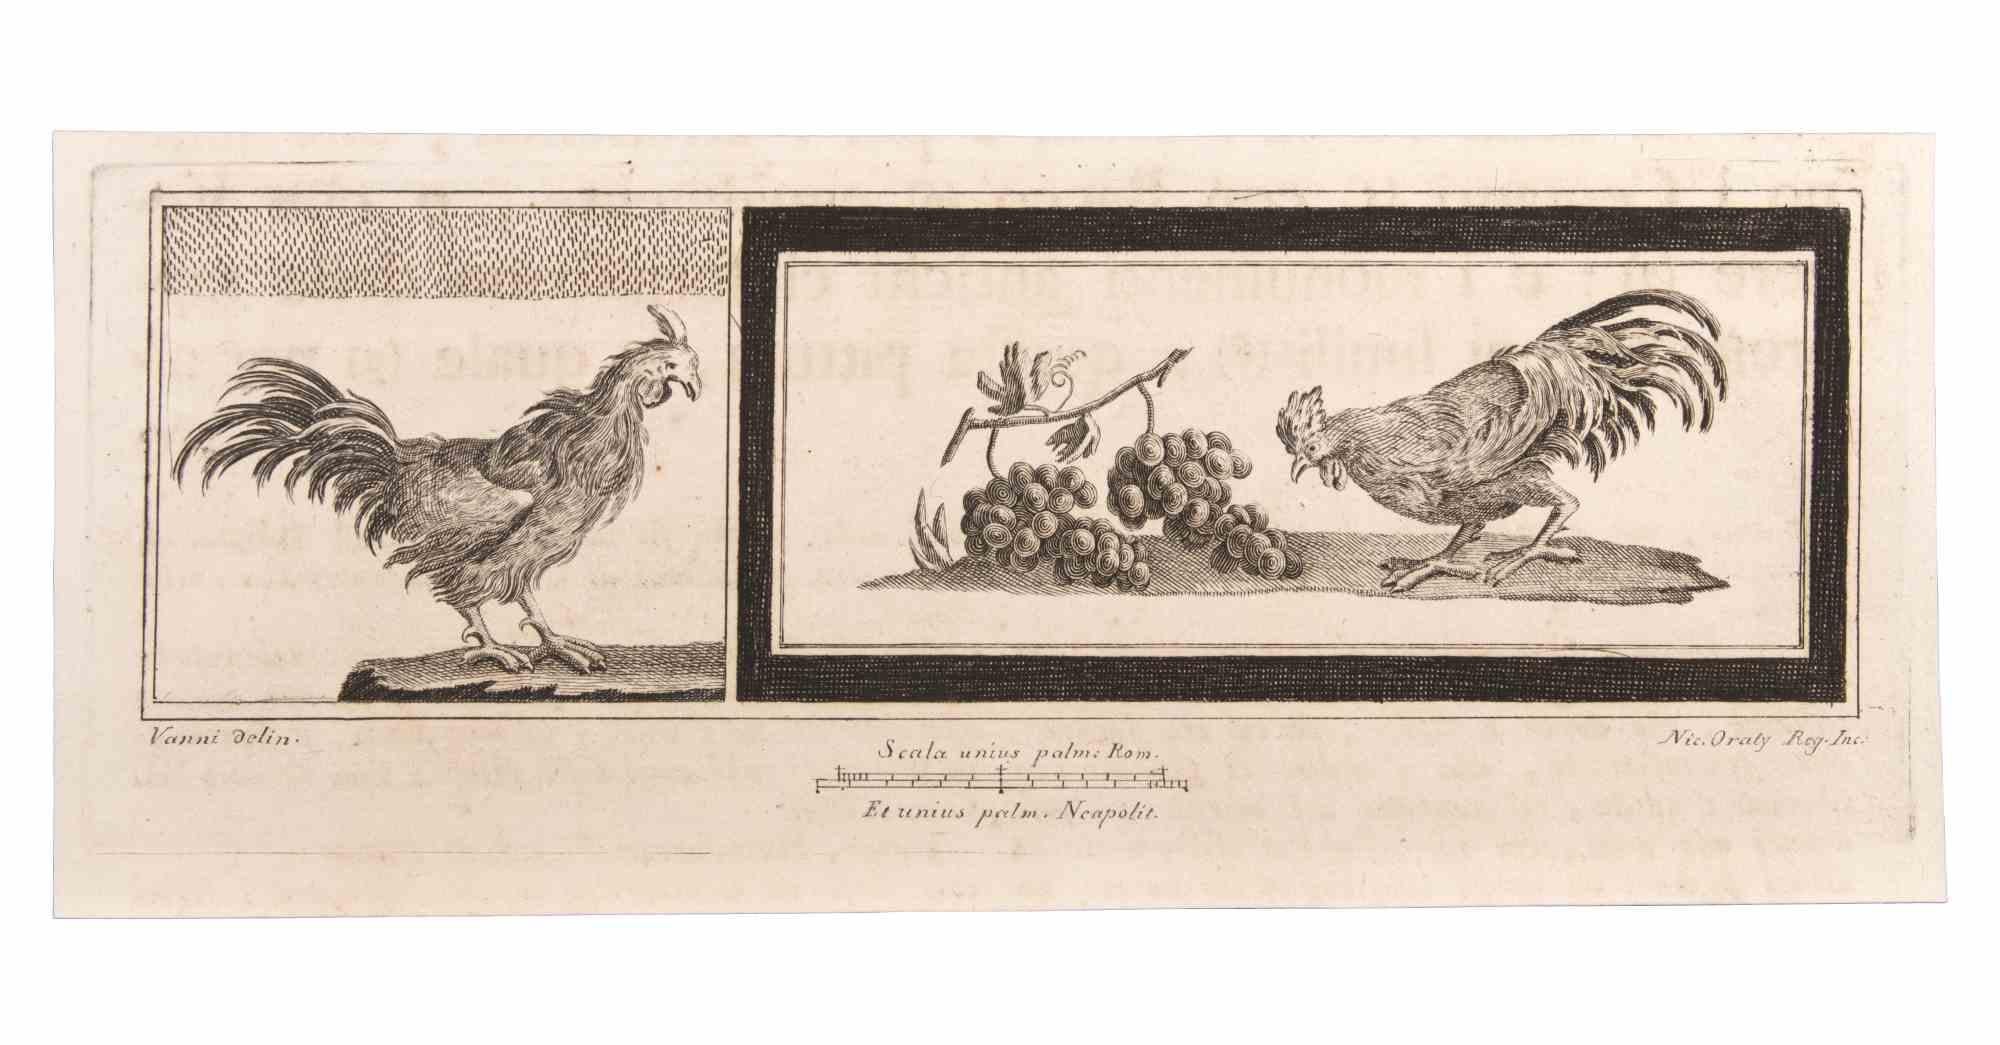 Decoration With Animals is an Etching realized by  Niccolò Vanni (1750-1770).

The etching belongs to the print suite “Antiquities of Herculaneum Exposed” (original title: “Le Antichità di Ercolano Esposte”), an eight-volume volume of engravings of